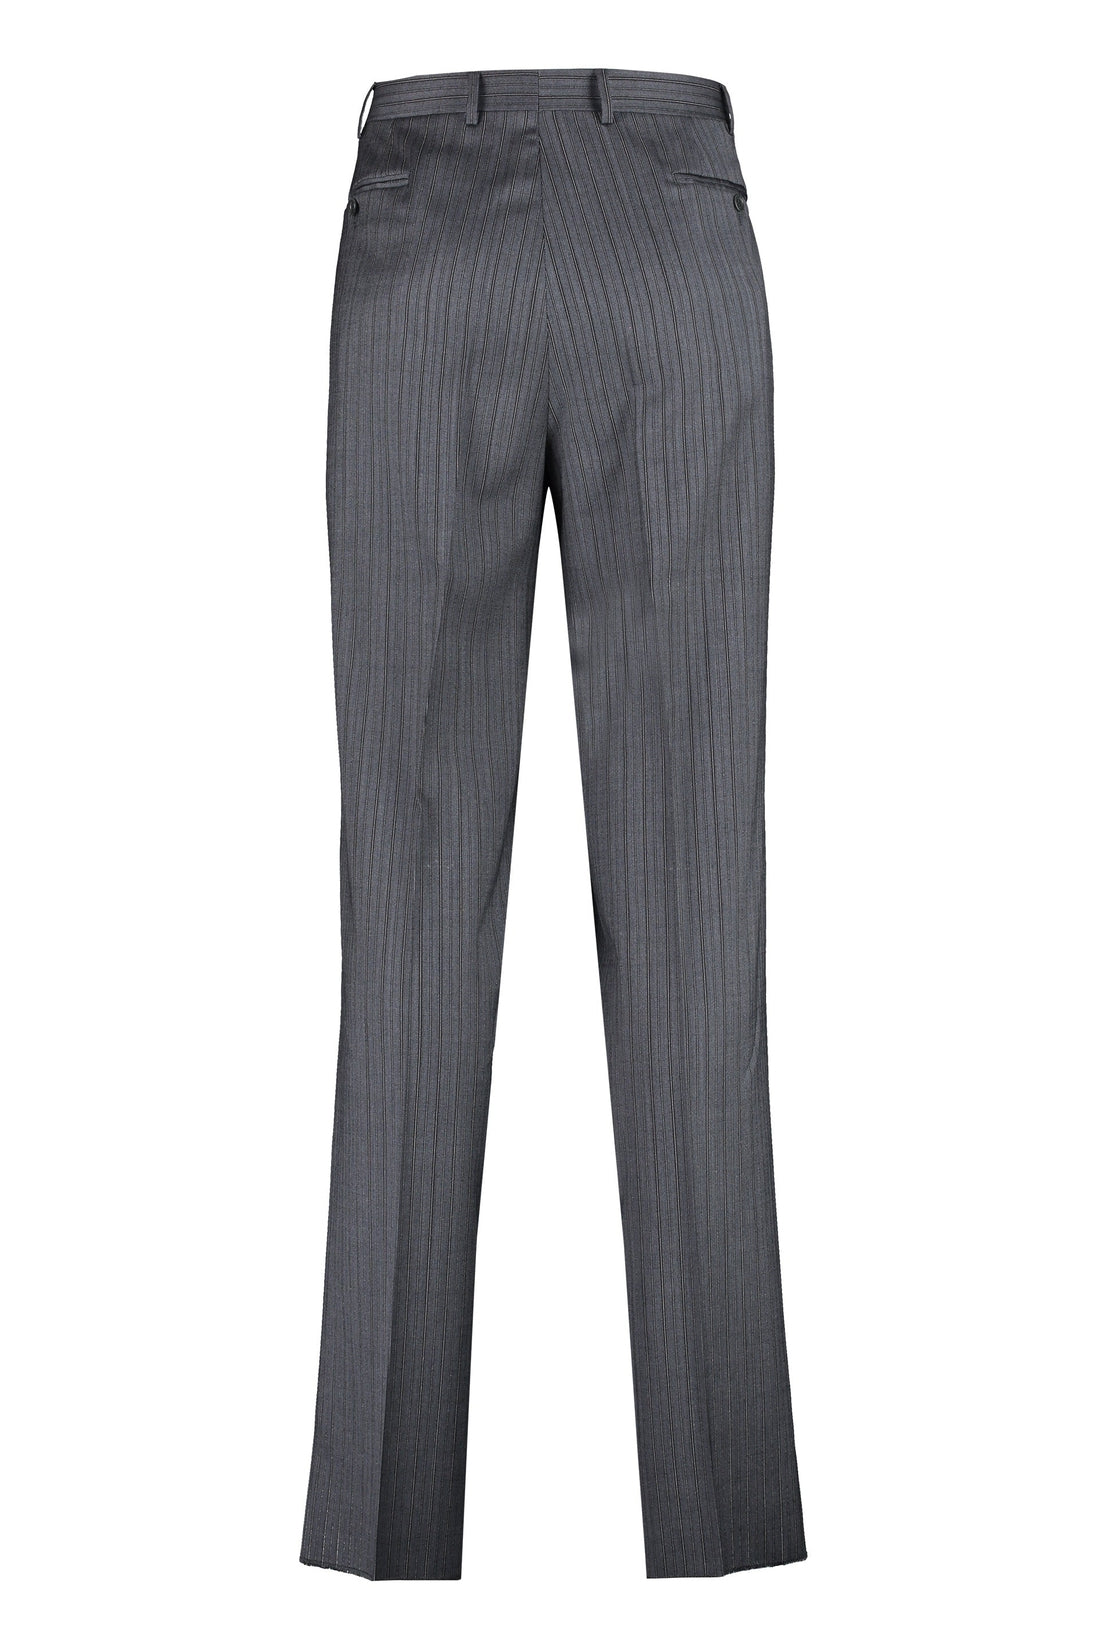 Canali-OUTLET-SALE-Pin-striped wool tailored trousers-ARCHIVIST